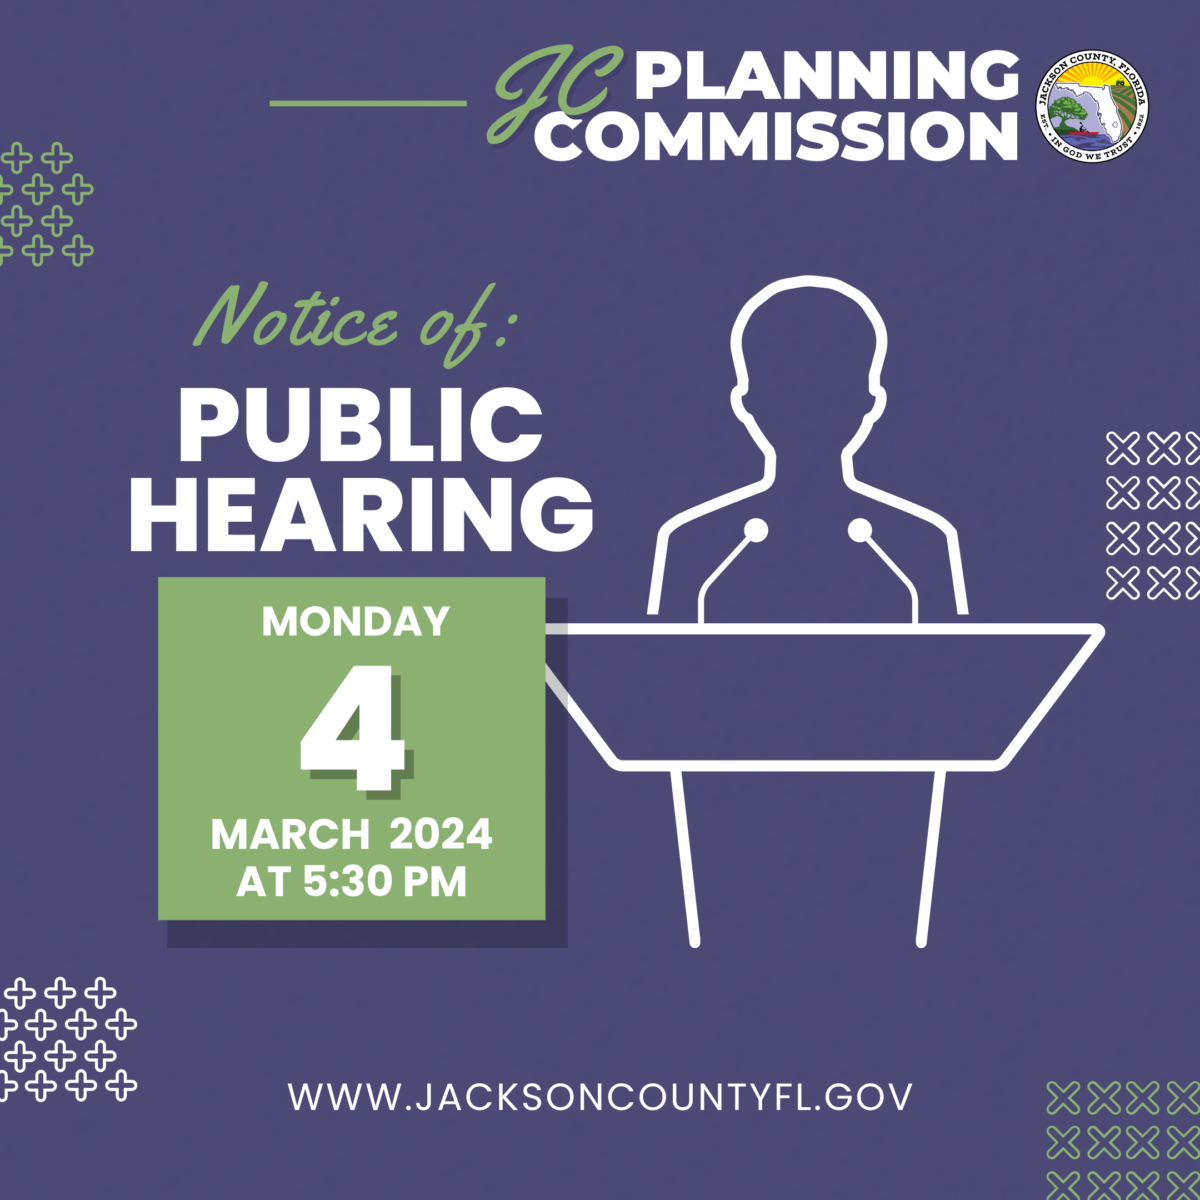 Planning Commission Meeting Notice for March 4, 2024 at 5:30 PM